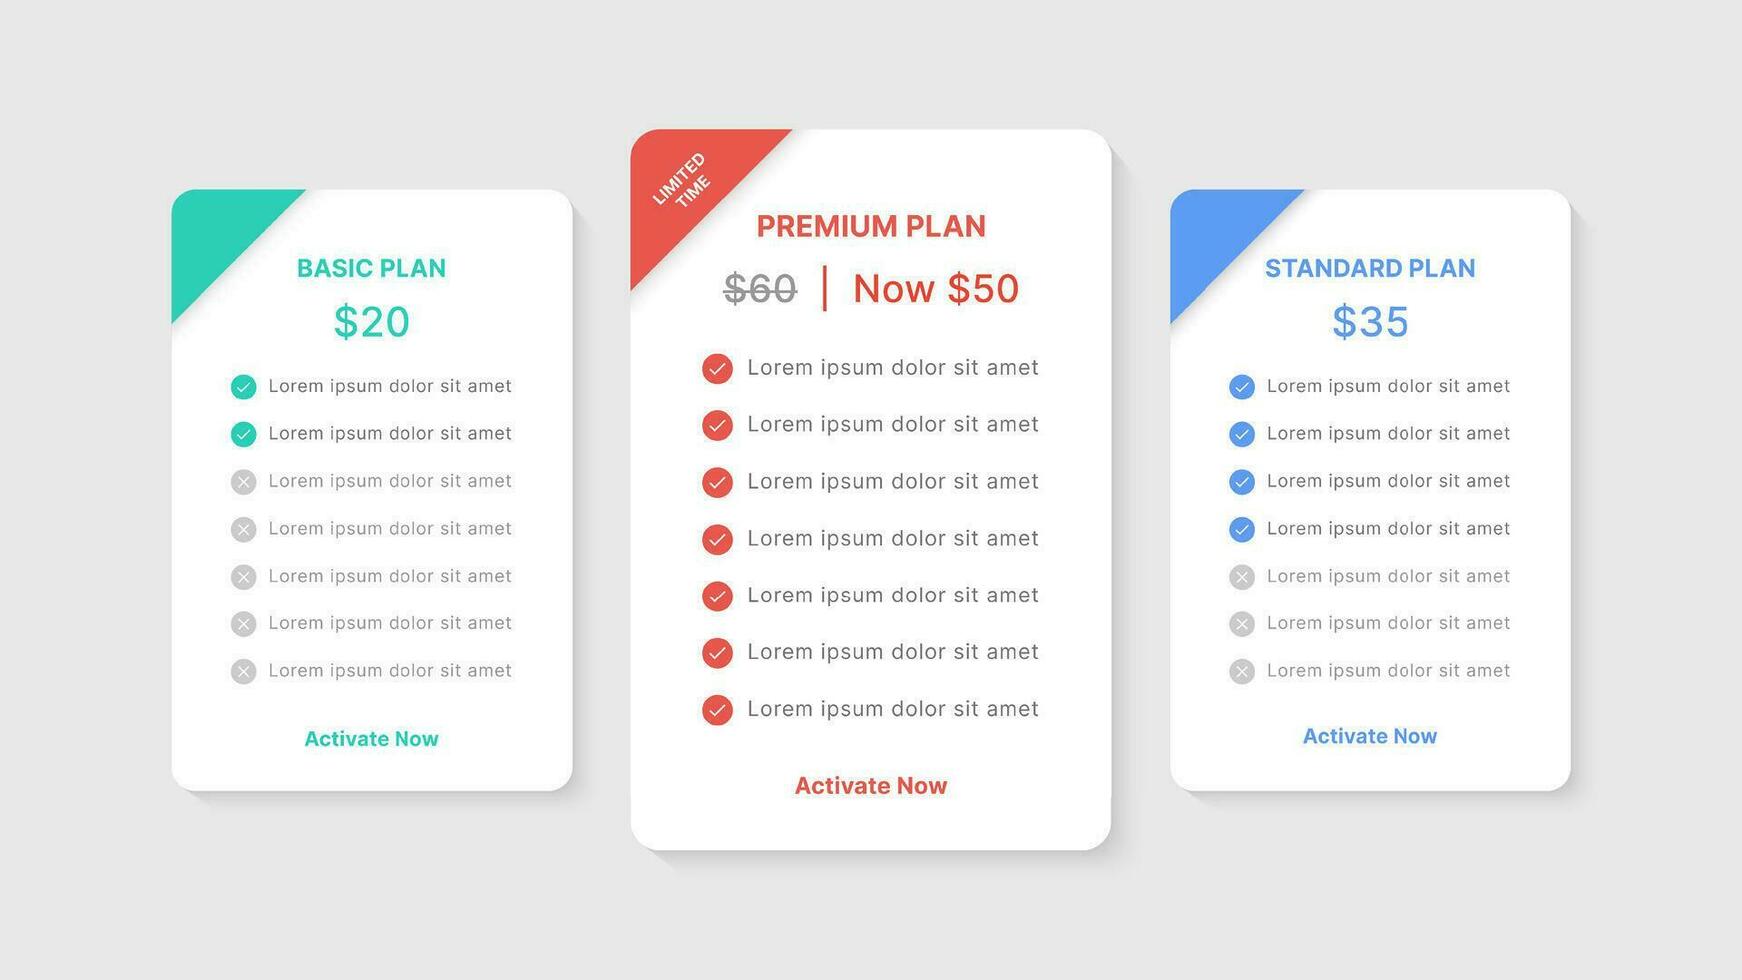 Pricing Table Packages Comparison Infographic Template Design with 3 Subscription Plans vector